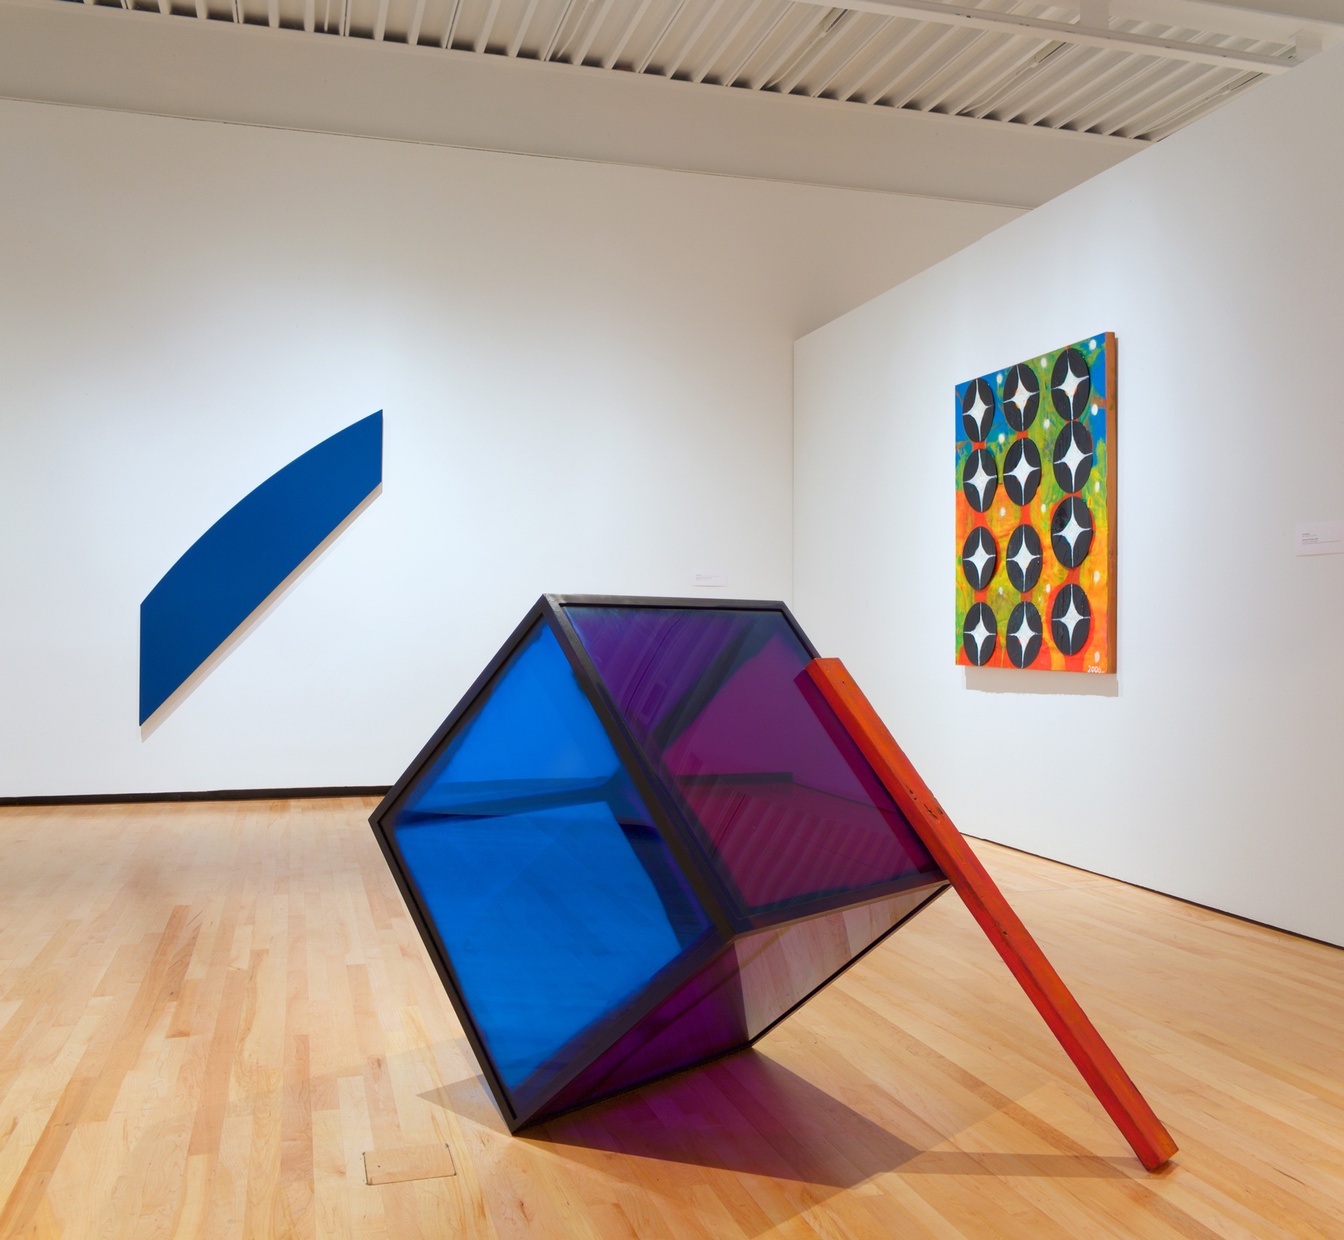 A large, purple and blue, translucent cube that is tilted at an angle with a red stick leaning against it and two abstract artworks on the background walls.